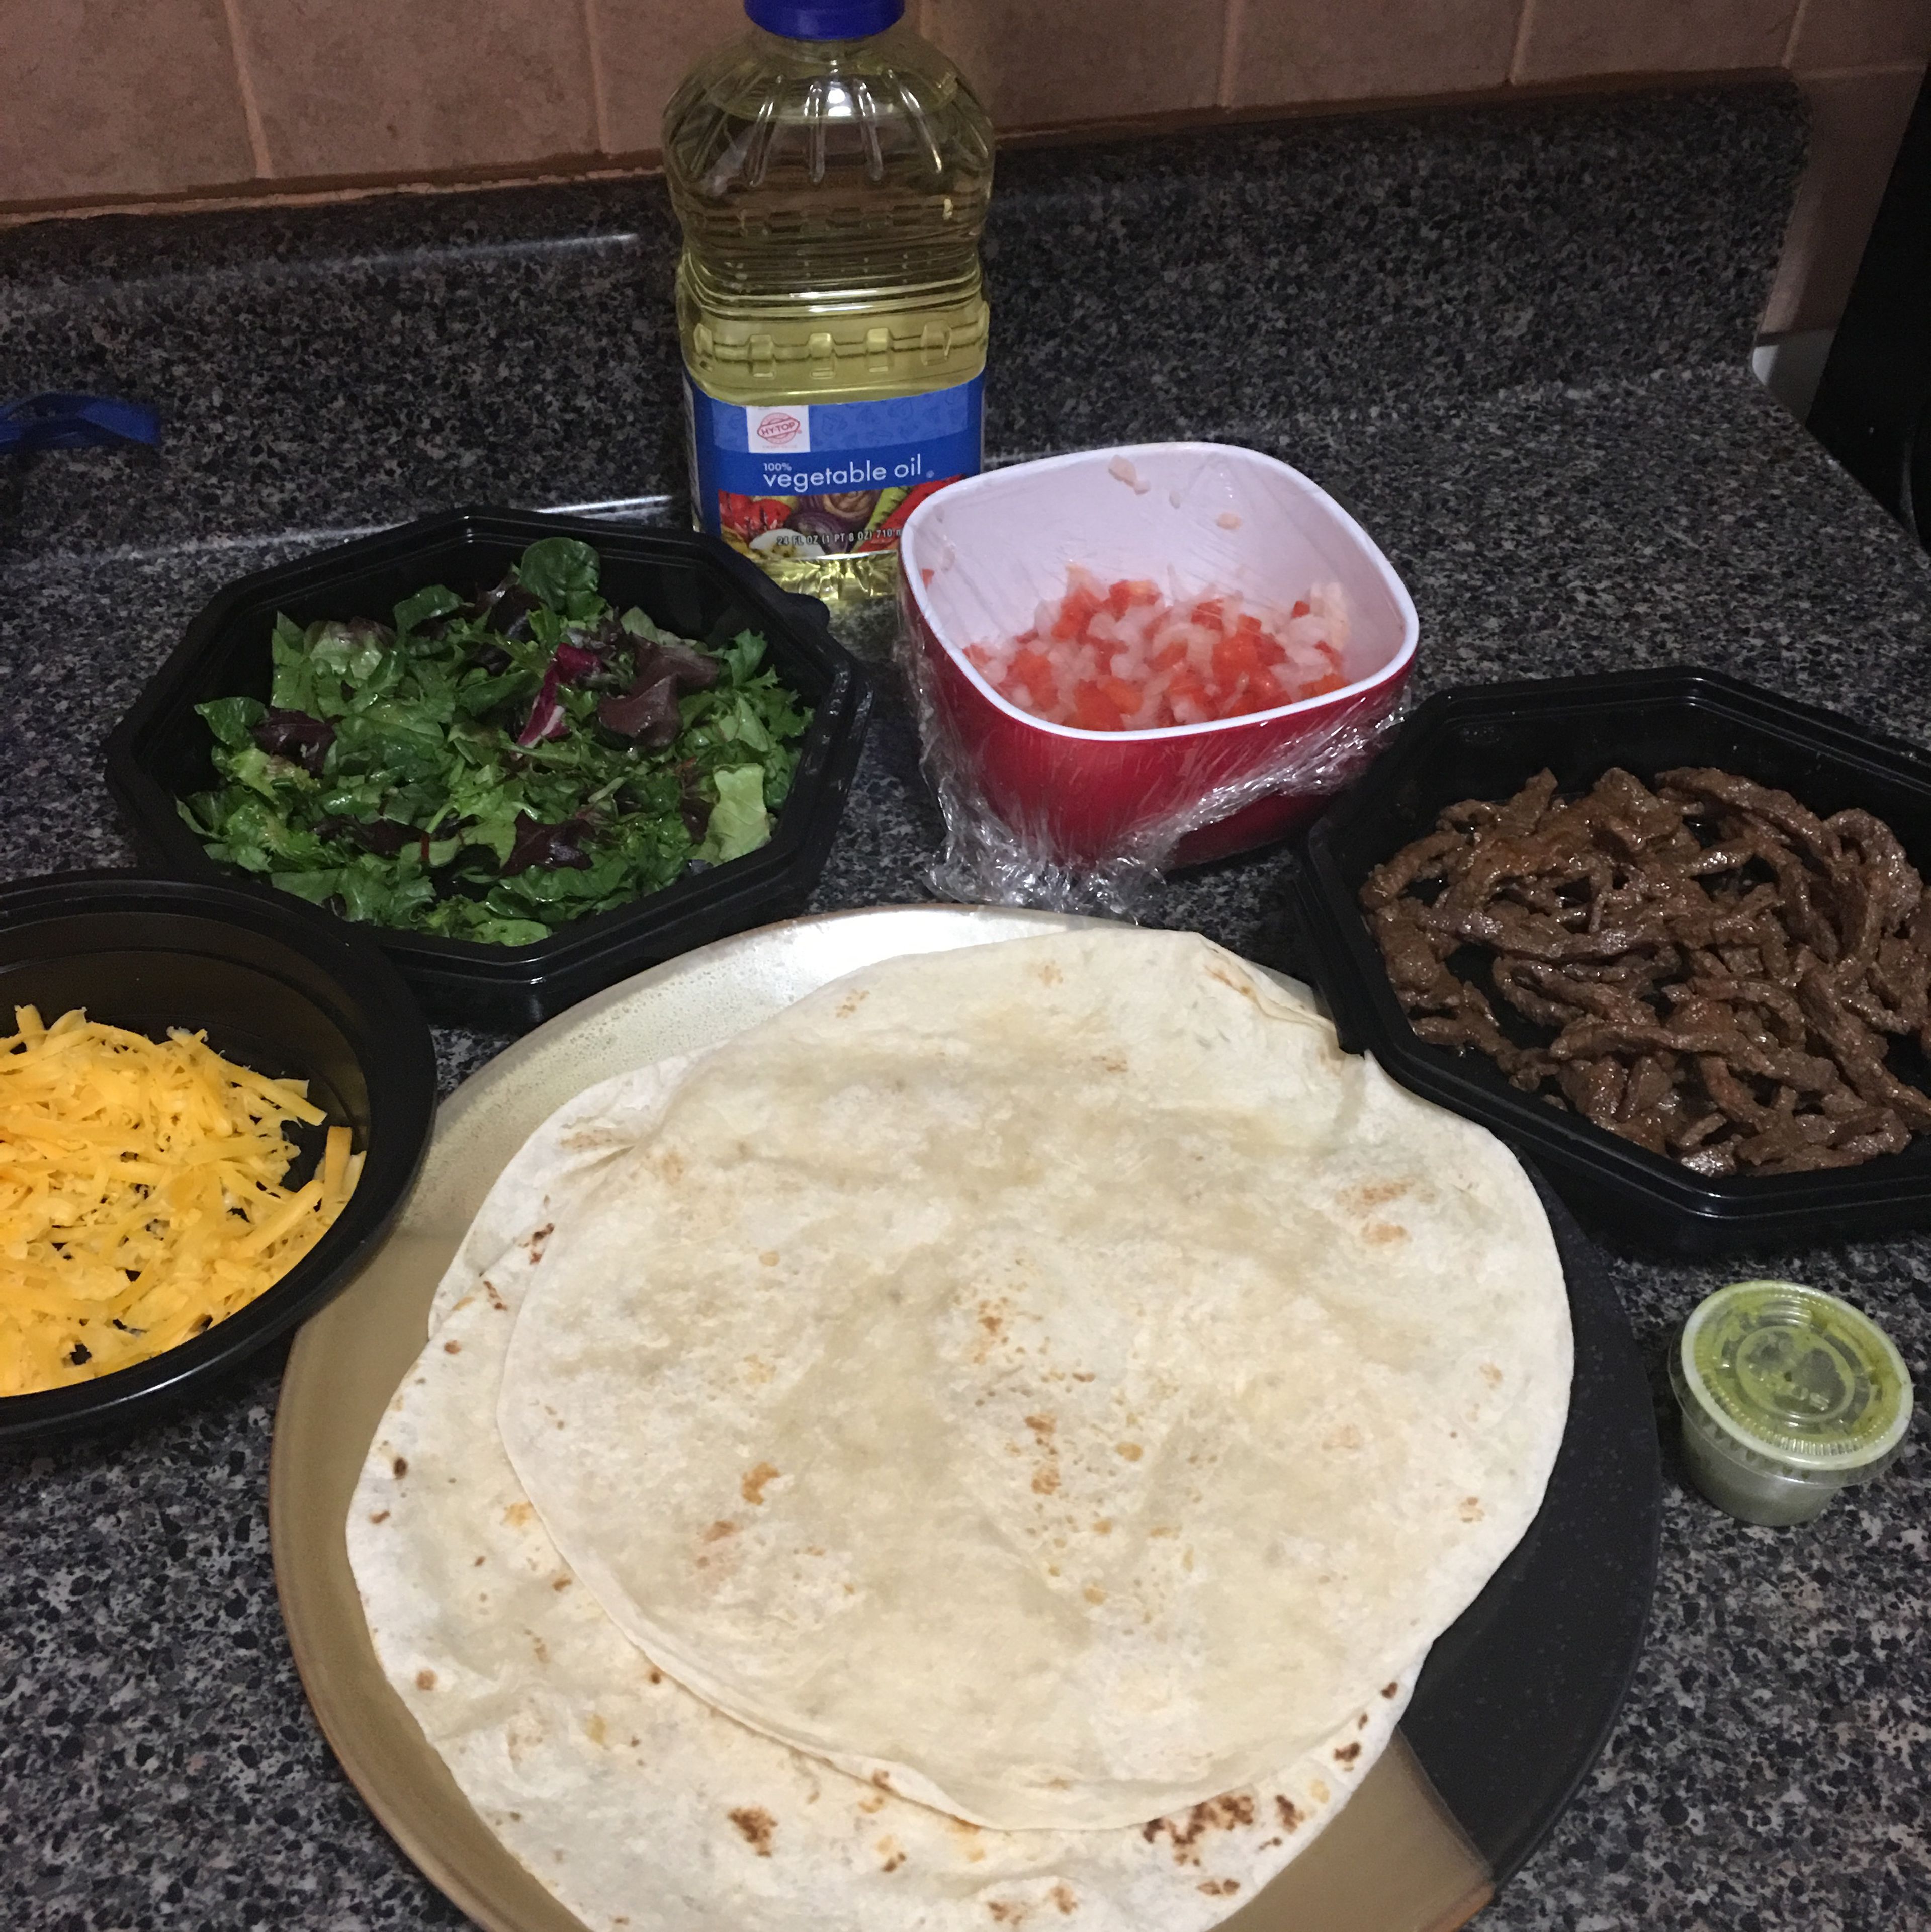 Cook the tortillas in a pan (2 min. Each side). Take a tortilla, add the salsa verde, add the meat, lettuce, bell pepper and onion, top with cheese and roll it.